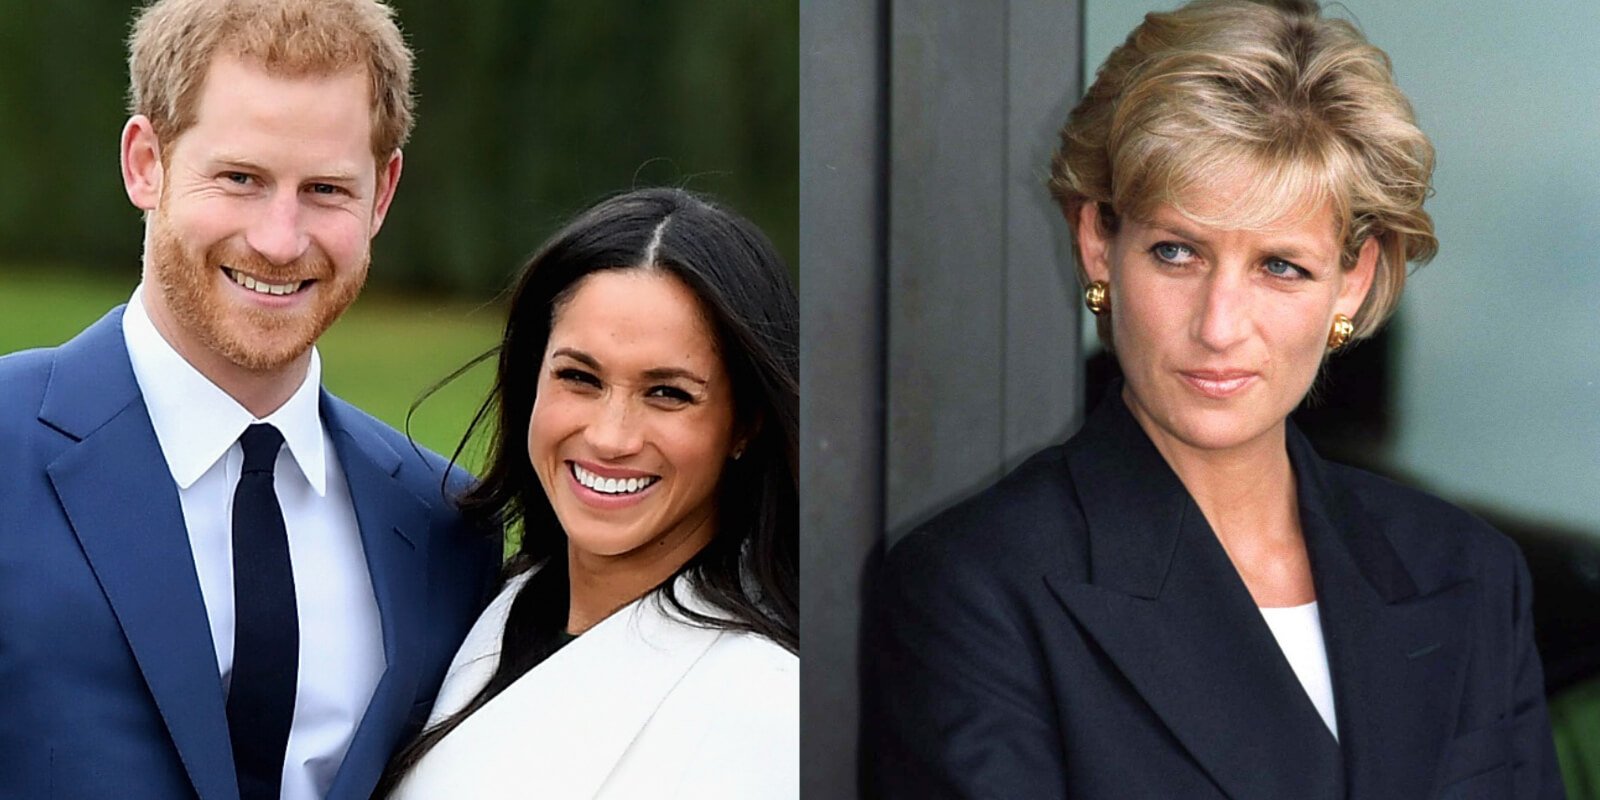 Prince Harry, Meghan Markle in a side by side photo collage with the late Princess Diana.